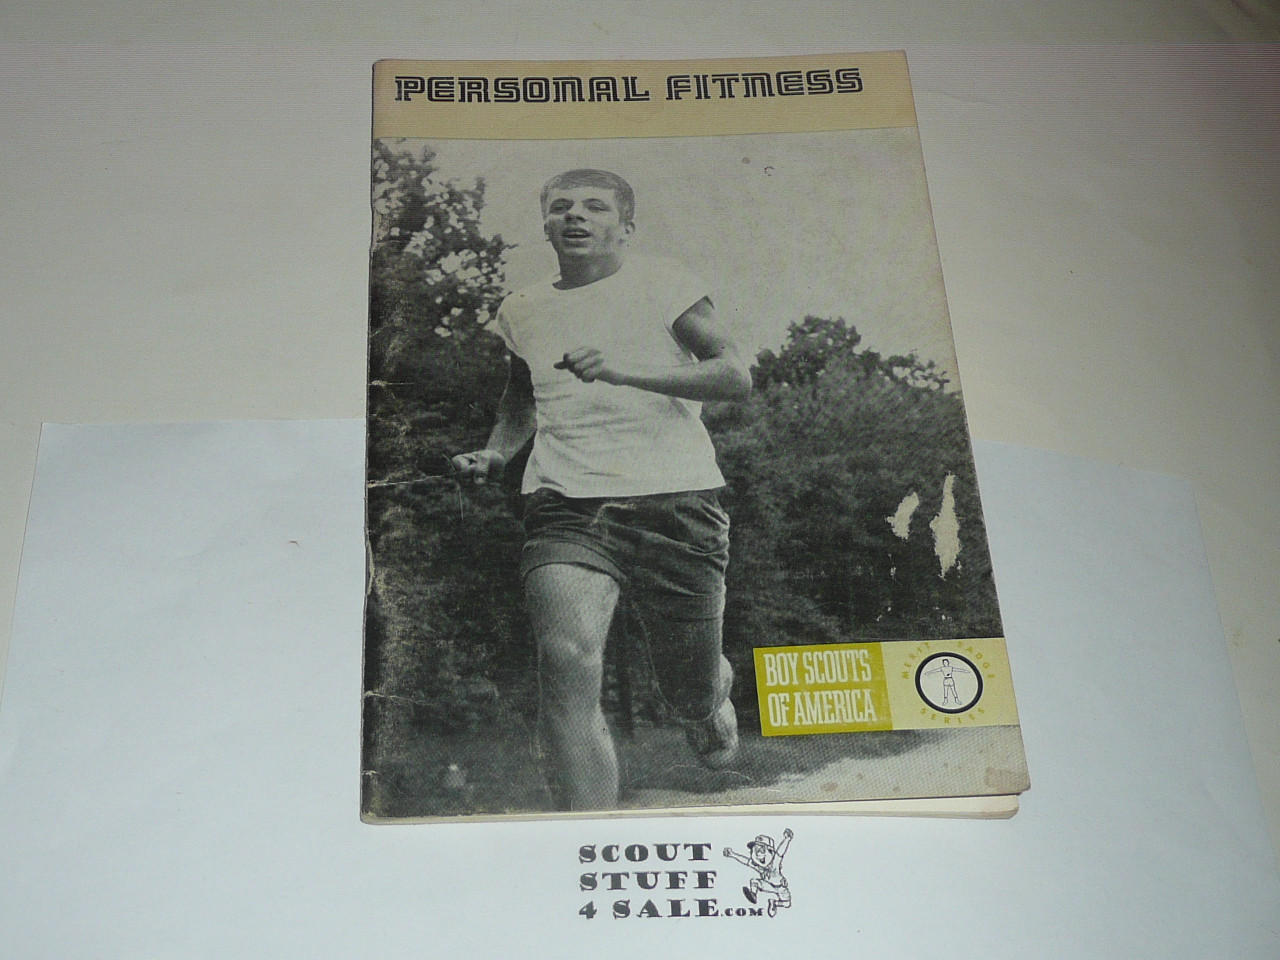 Personal Fitness Merit Badge Pamphlet, Type 8, Green Band Cover, 4-74 Printing